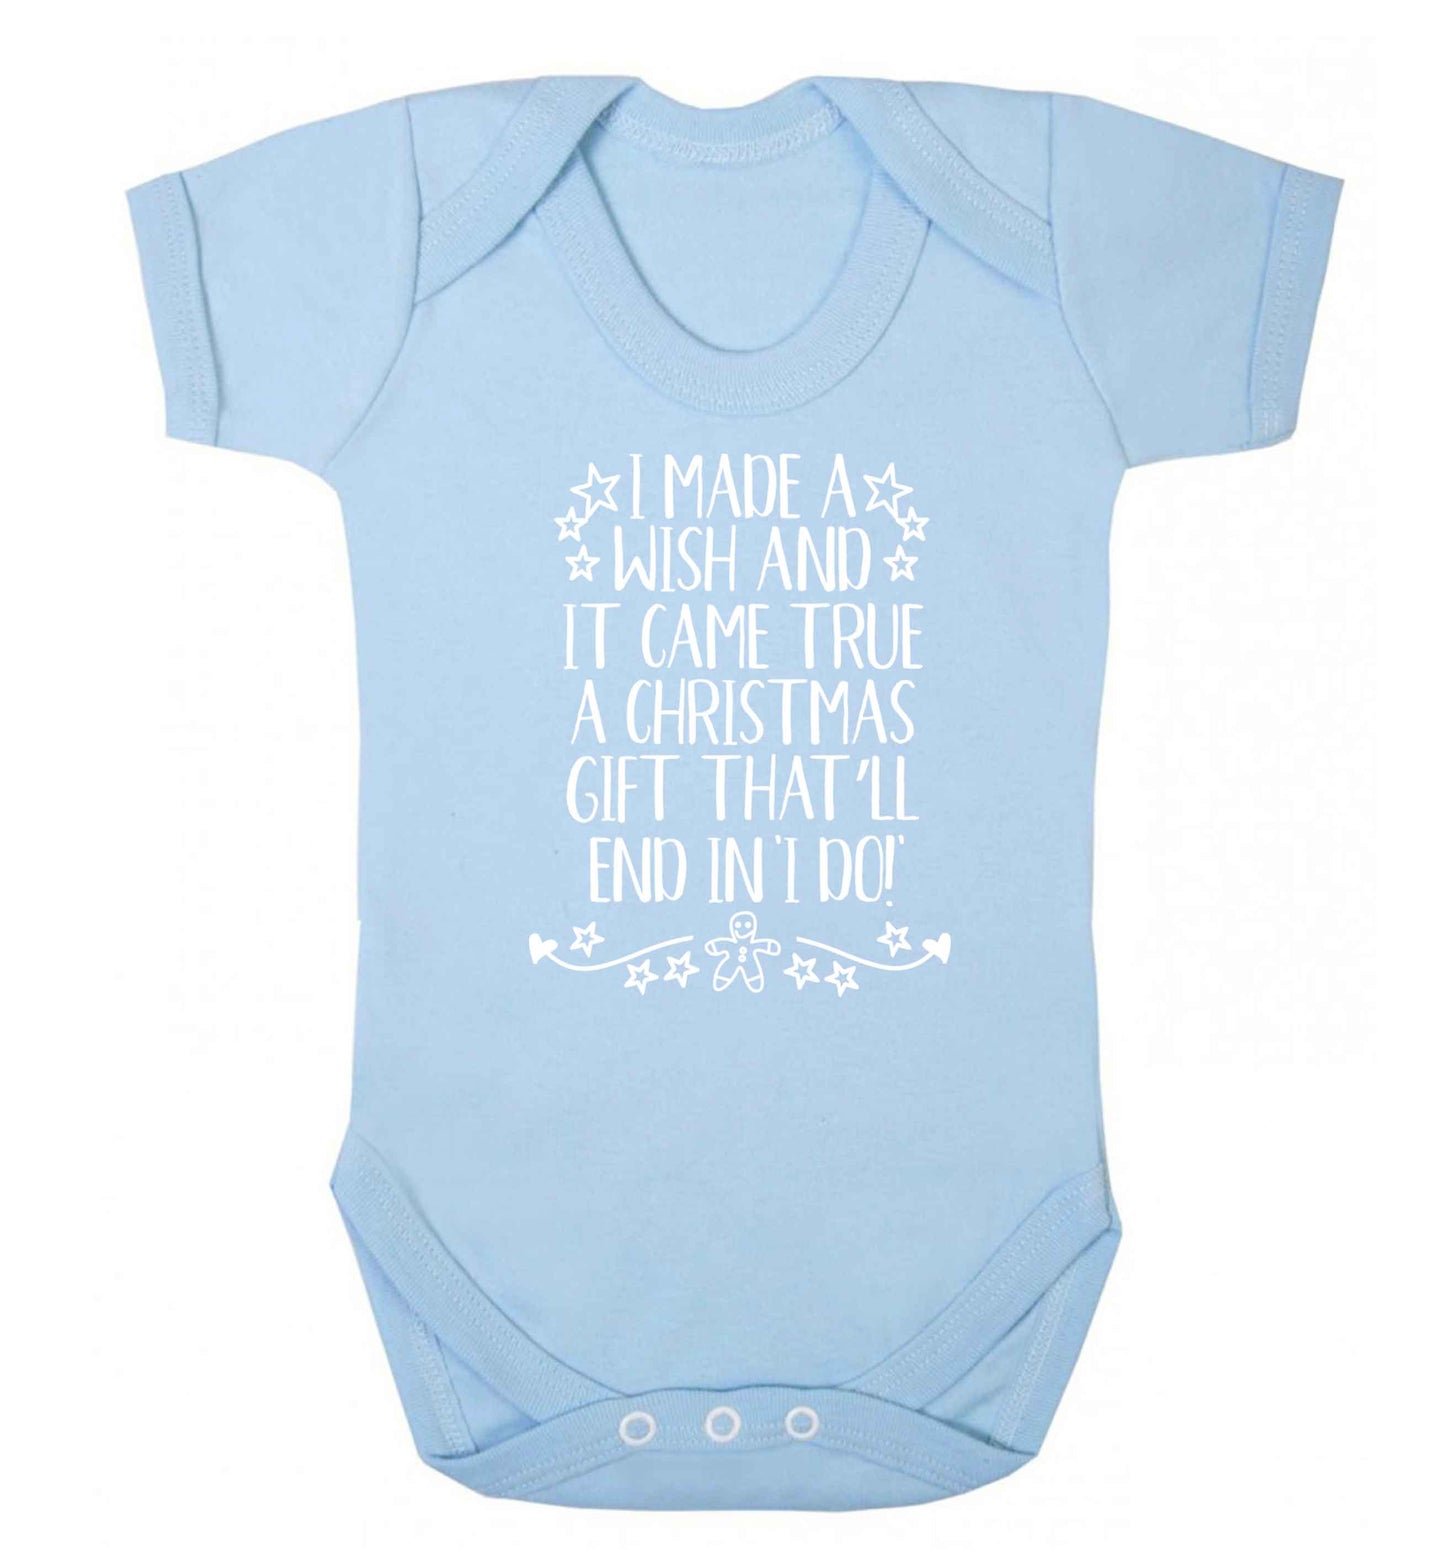 I made a wish and it came true a Christmas gift that'll end in 'I do' Baby Vest pale blue 18-24 months